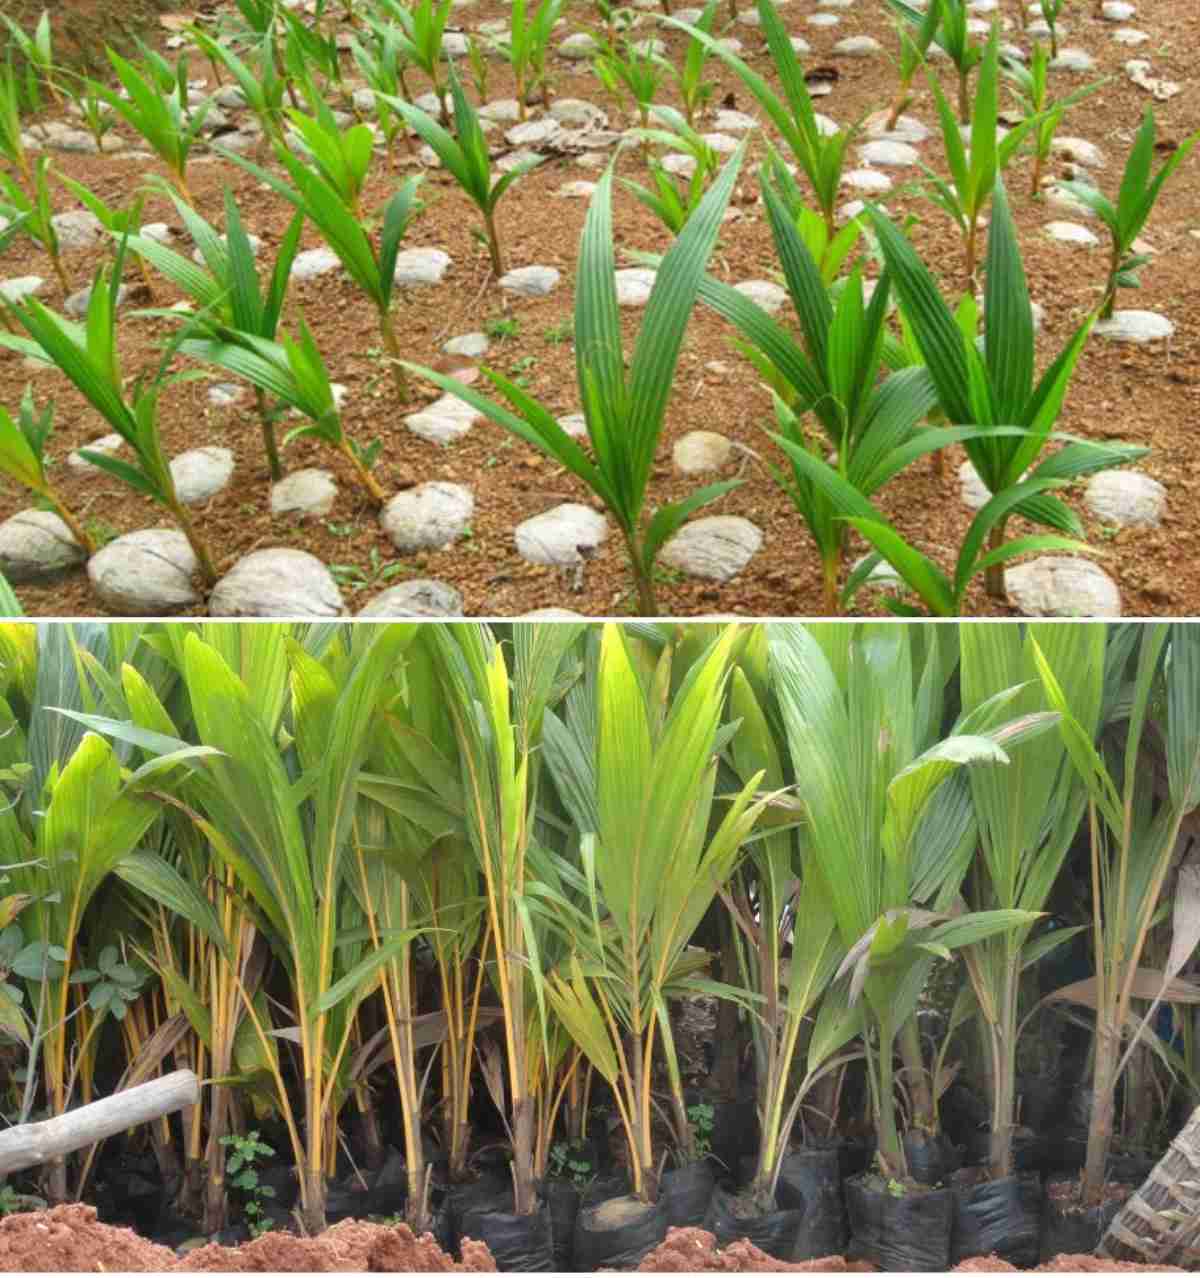 A gudie to growing Coconut plants from seed.